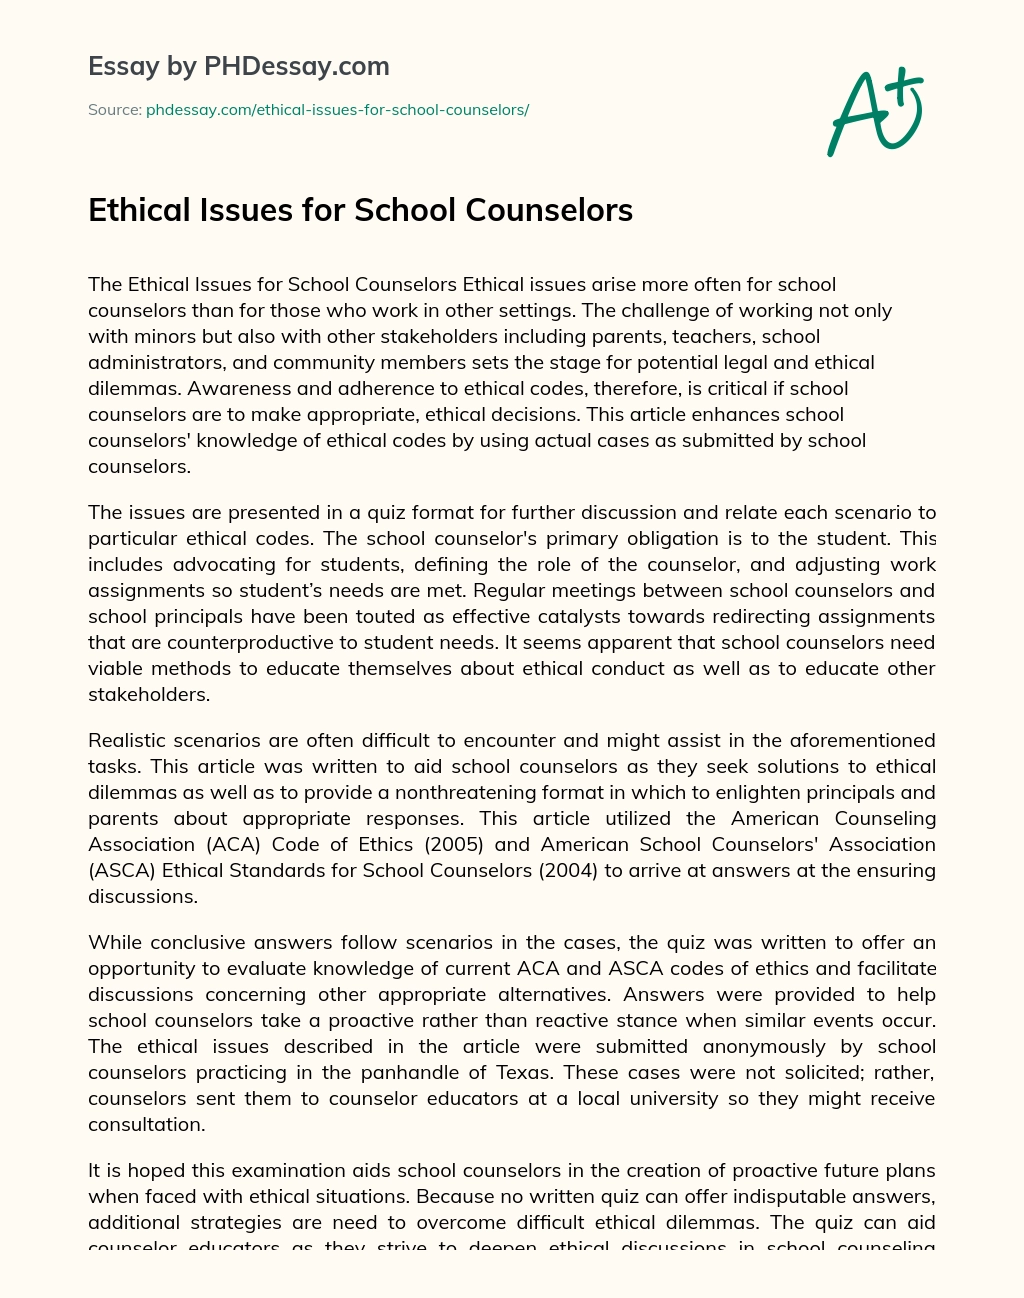 Ethical Issues for School Counselors essay